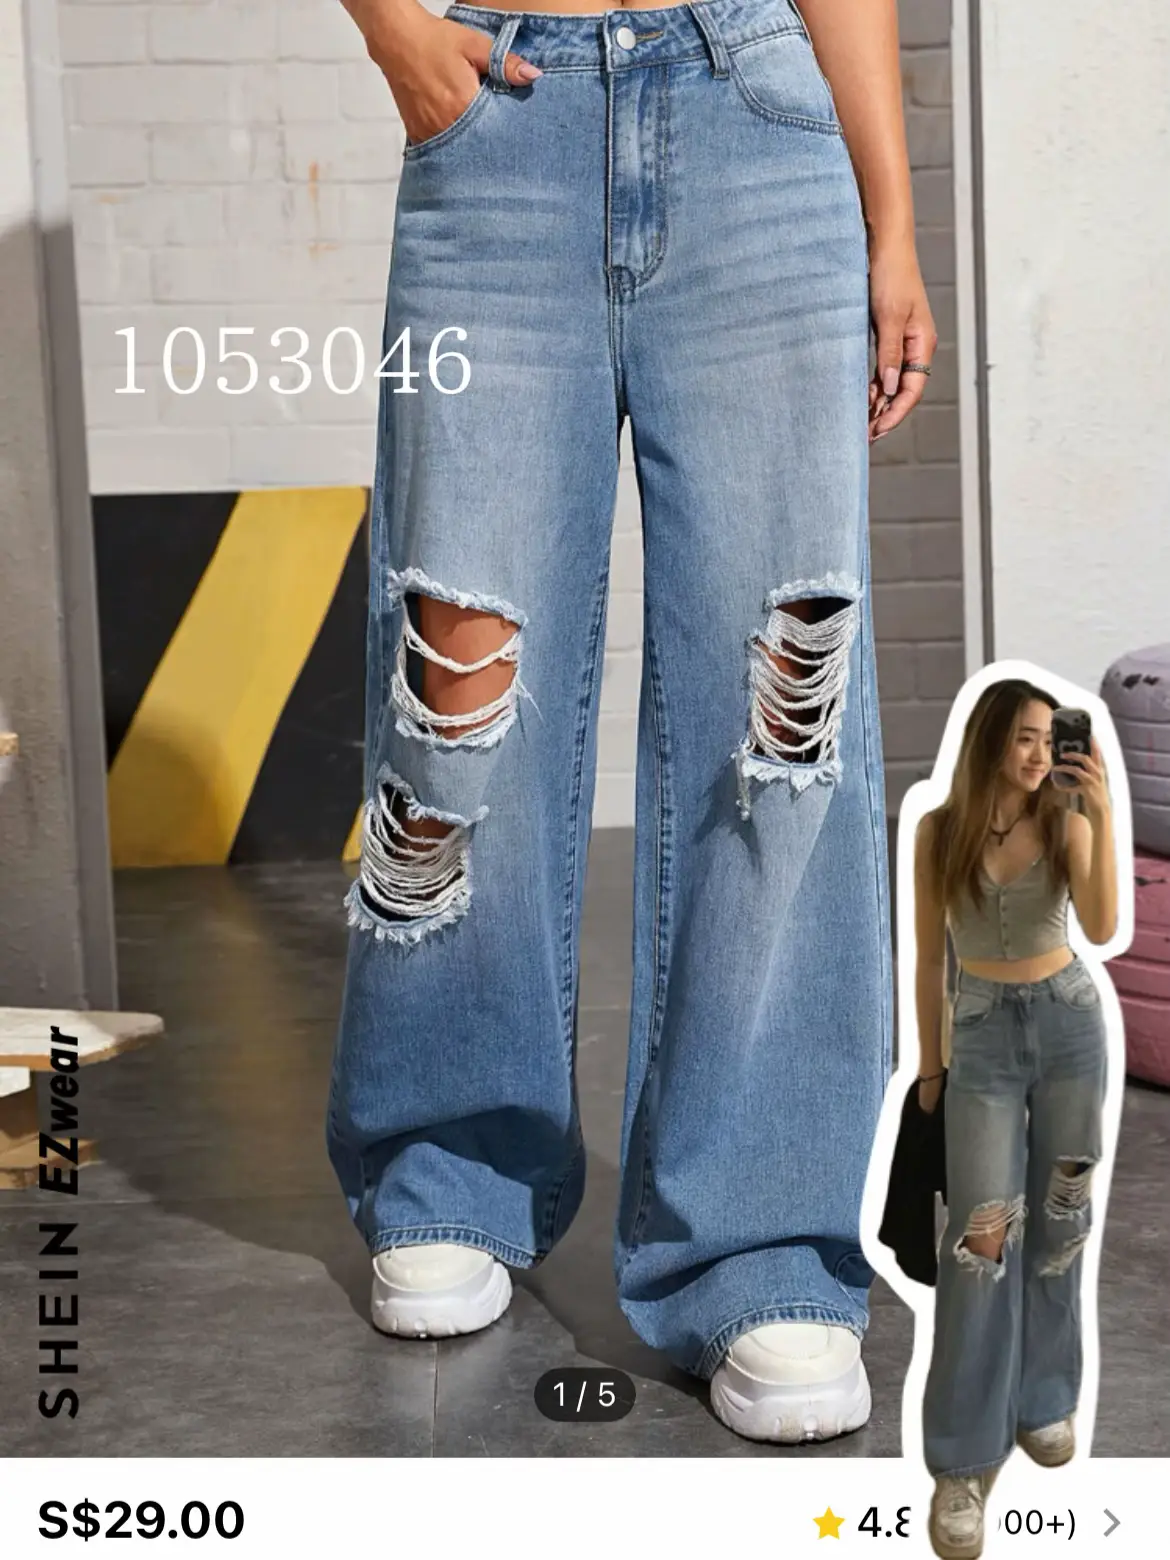 Shein's 'perfect fit' high waisted jeans have over a 1,000 five